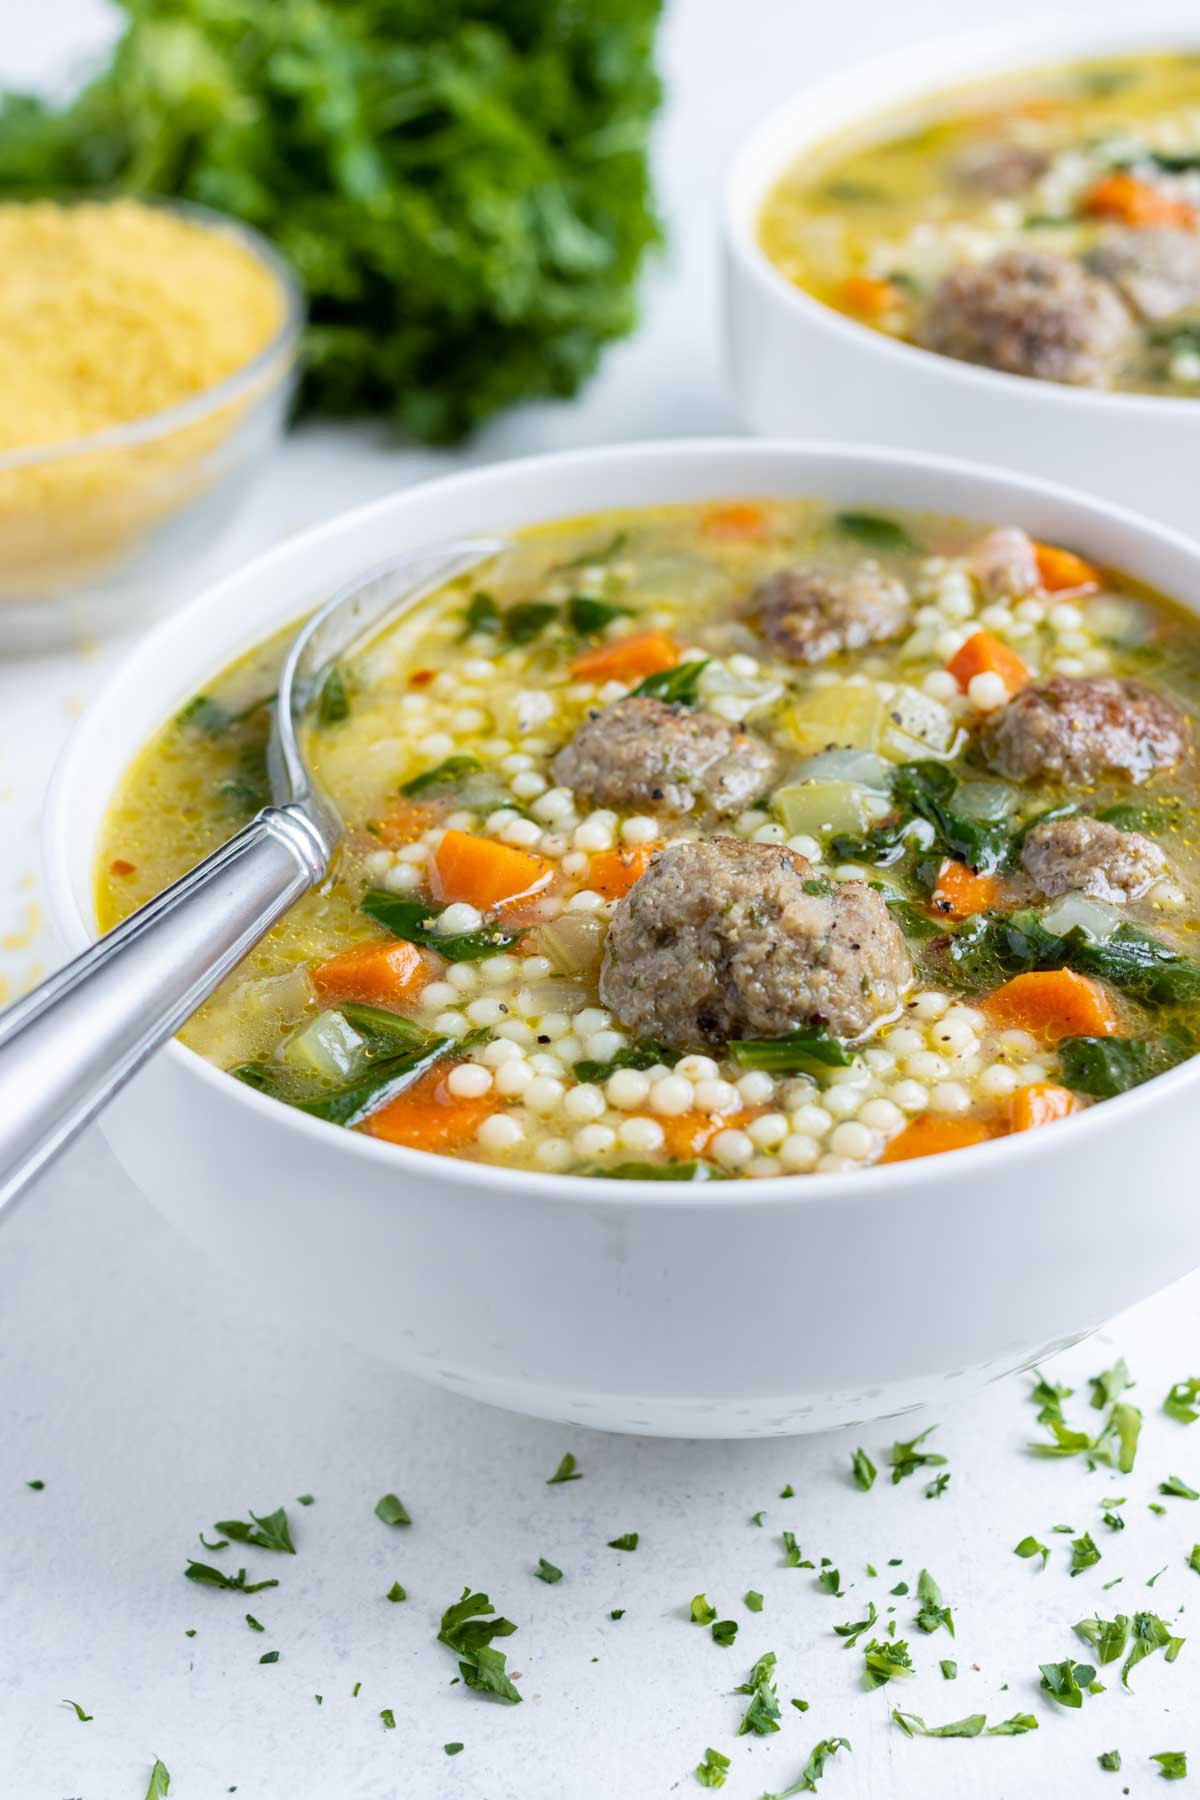 Classic Italian wedding soup is served in a white bowl.